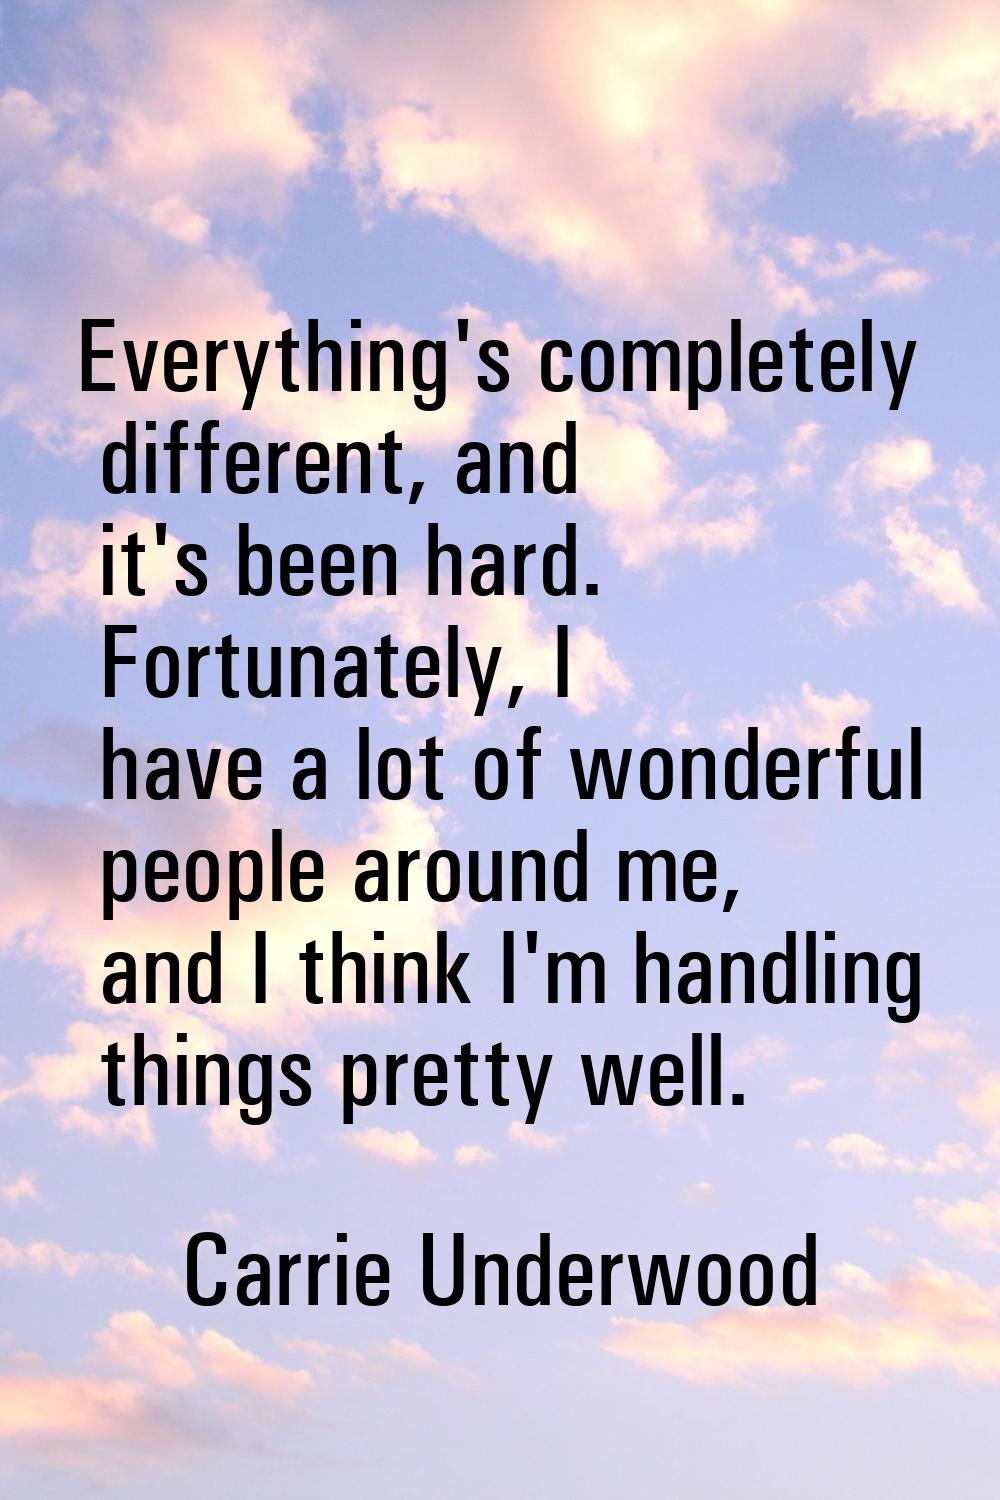 Everything's completely different, and it's been hard. Fortunately, I have a lot of wonderful peopl